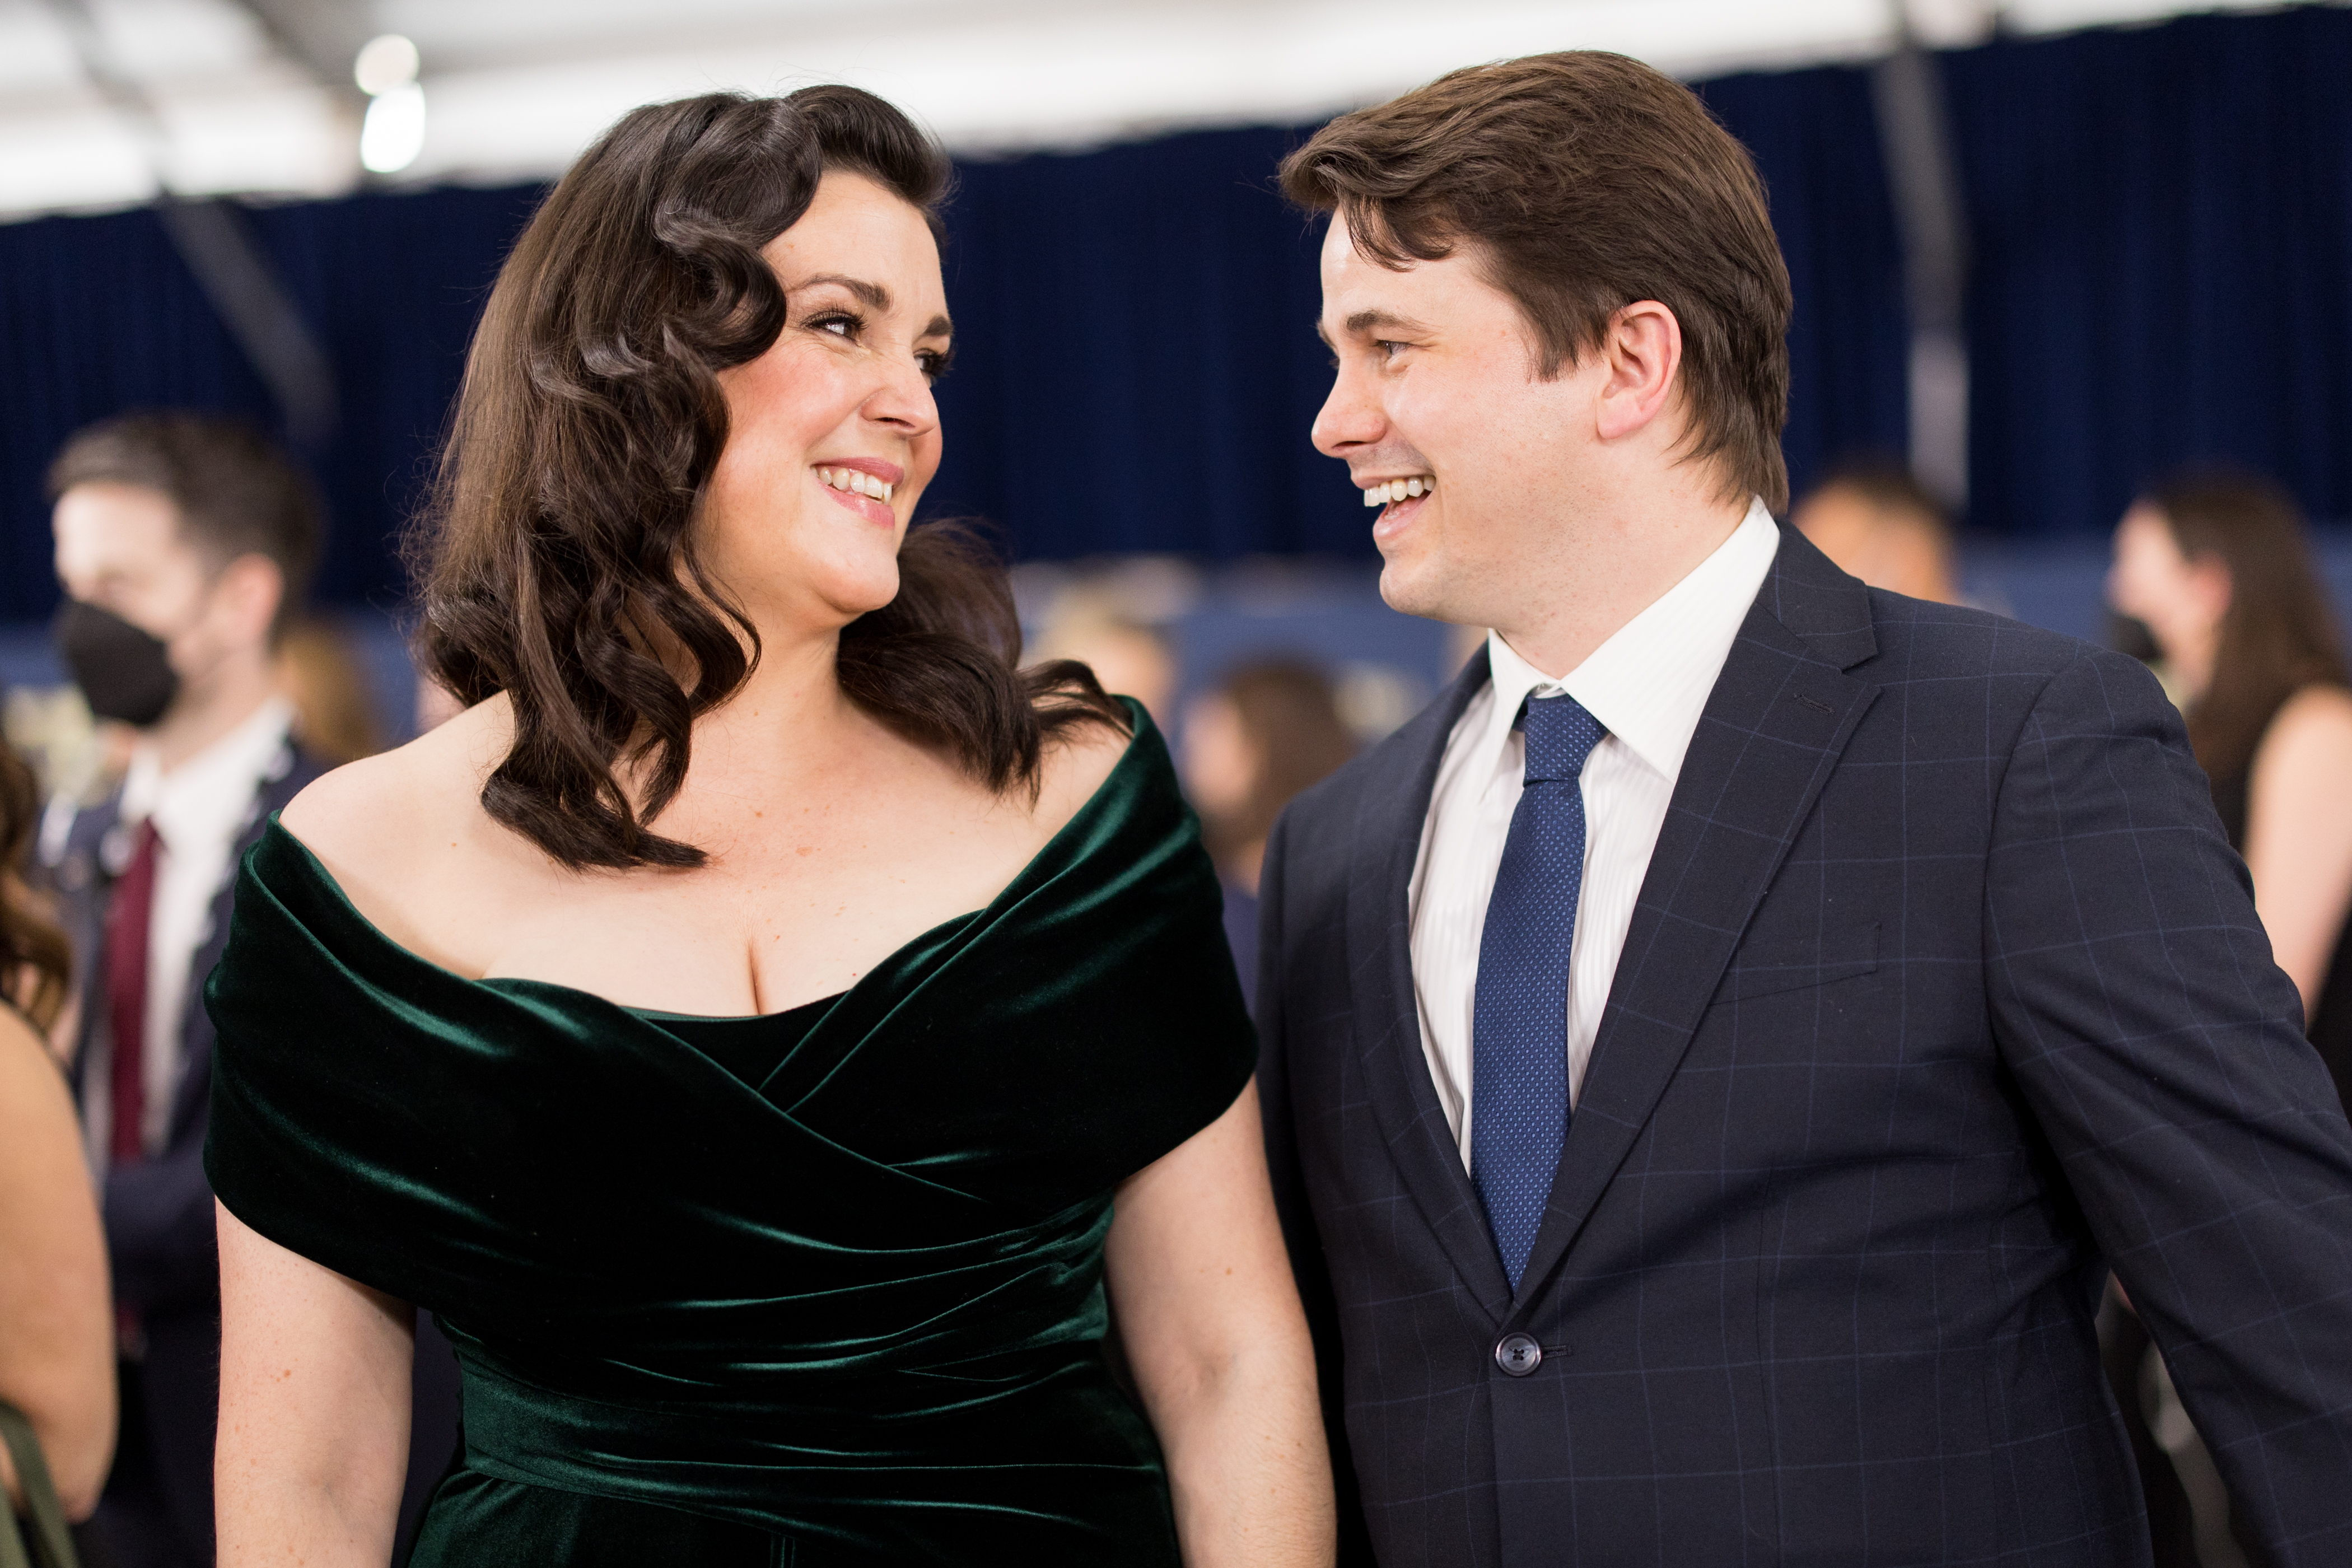 Melanie Lynskey and Jason Ritter at the 28th Screen Actors Guild Awards on February 27, 2022, in Santa Monica, California | Source: Getty Images